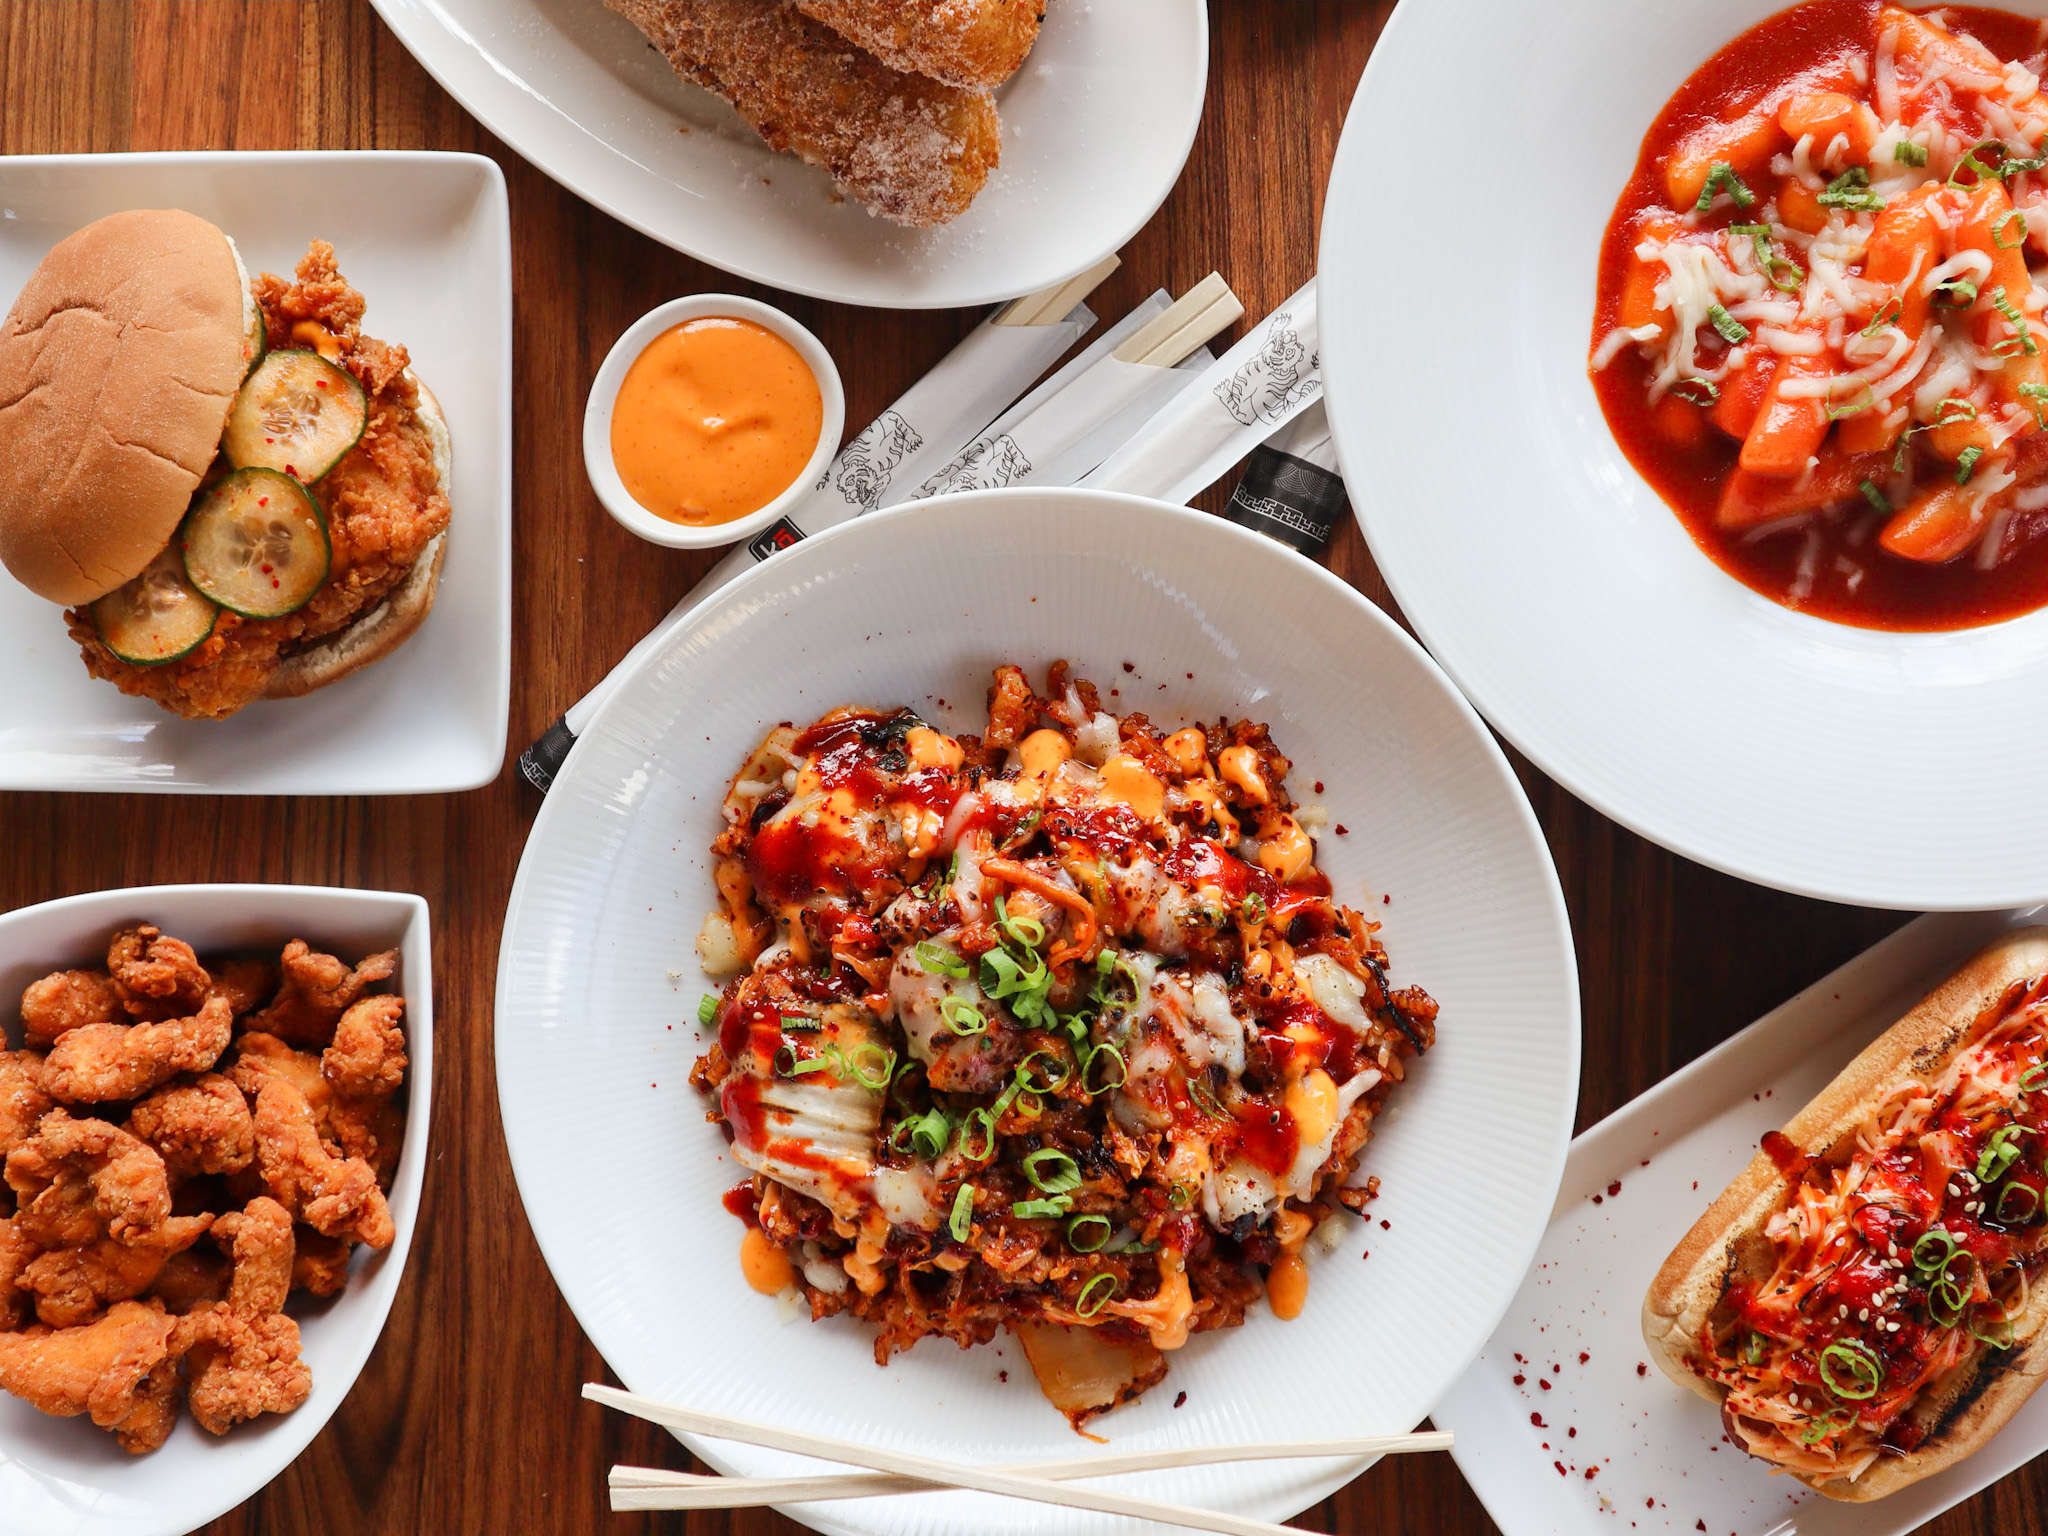 A spread of Korean comfort foods includes Korean fried chicken sandwich, Korean fried chicken nuggets, kimchi mac and cheese, Korean corn dogs, and&nbsp;tteokbokki&nbsp;(Korean rice cakes) from TKO stall at Southern Feed Store in East Atlanta.